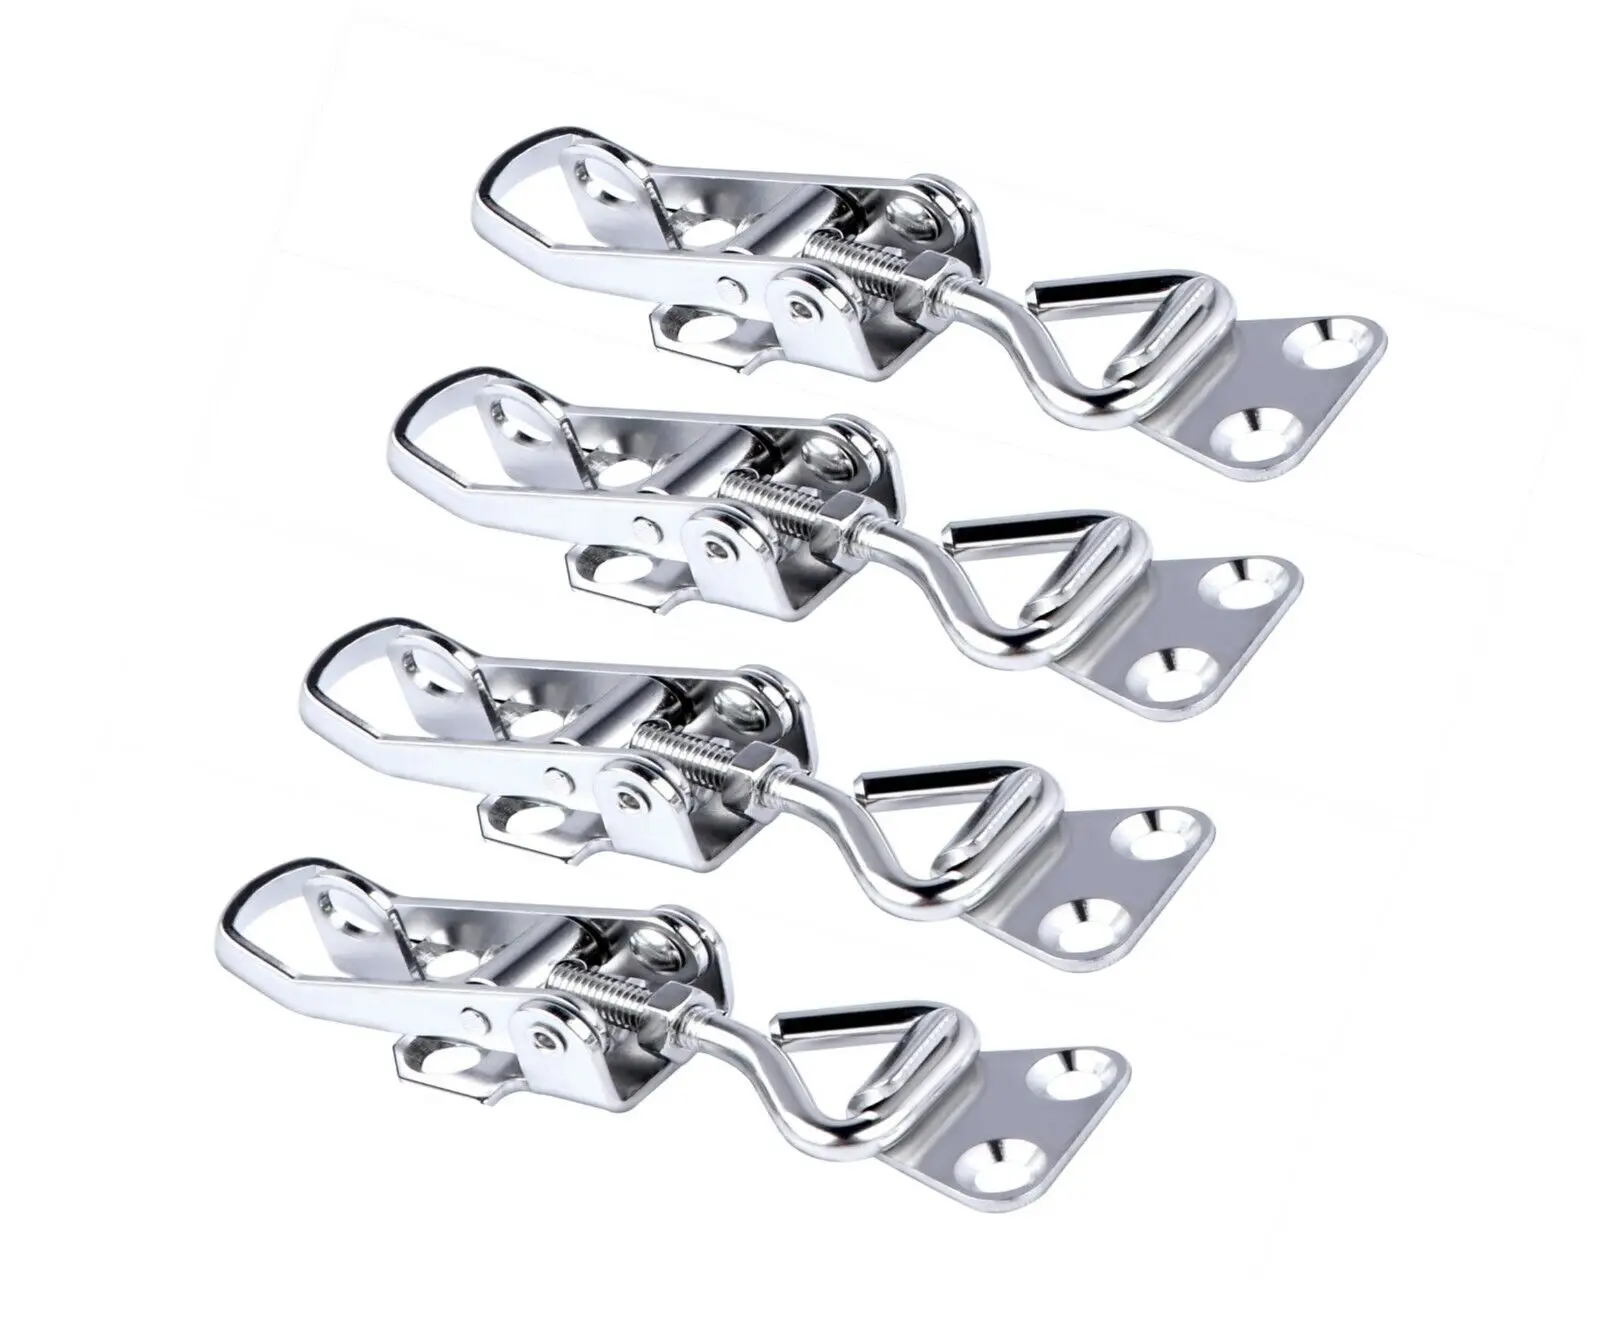 Boat Accessories 4 Pieces Cabinet Boxes Lever Handle Toggle Catch Latch Lock Clamp Hasp 26.5X75 mm